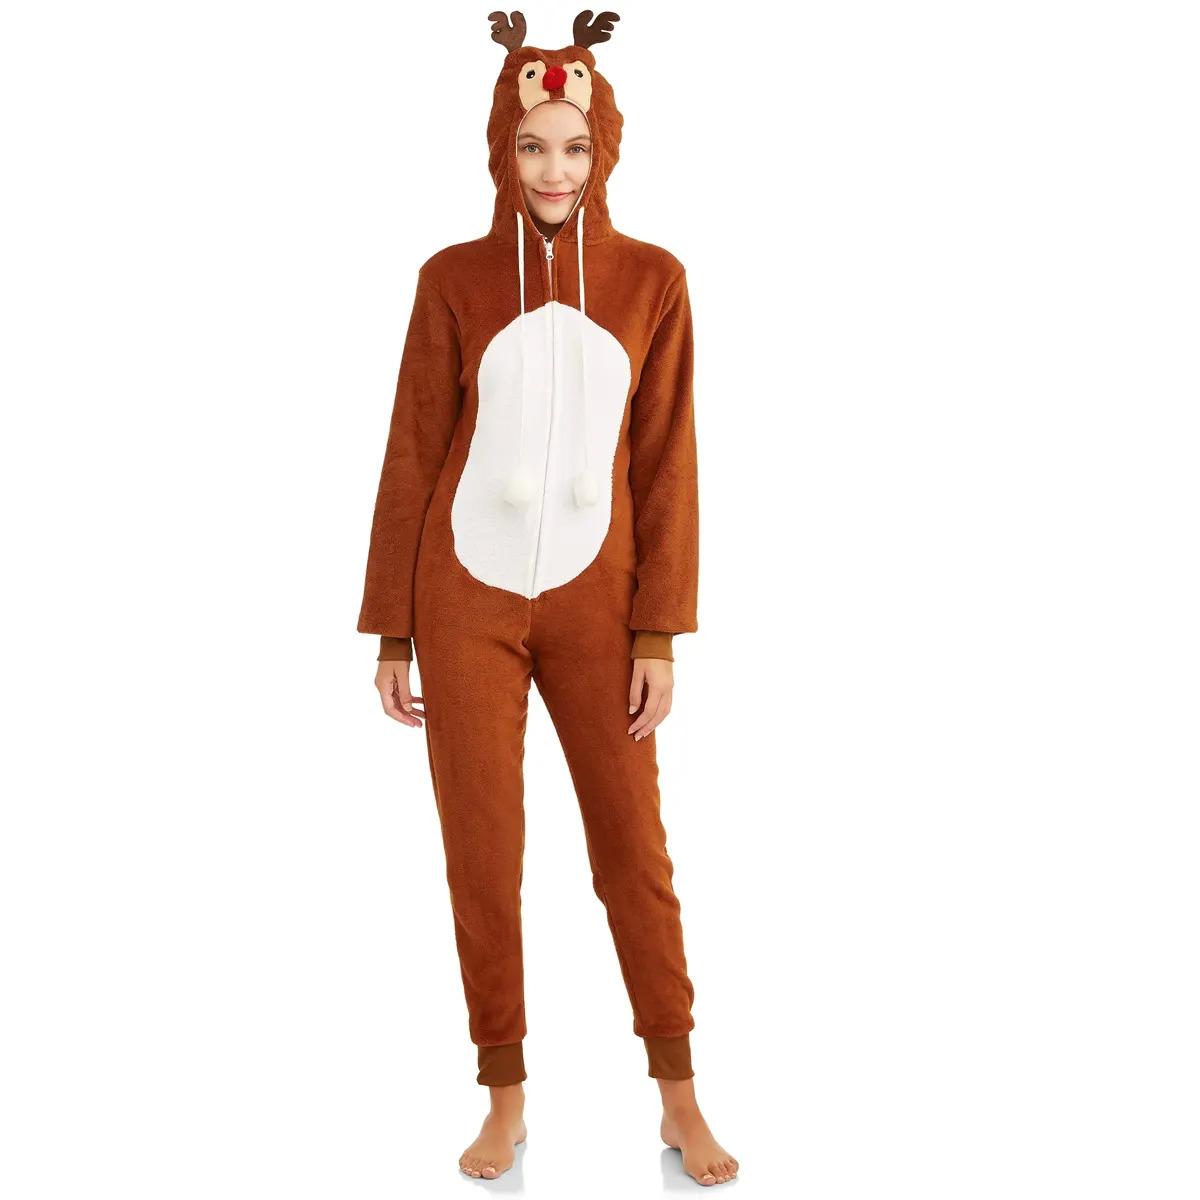 The Great Christmas Edition Plush Hooded One Piece Union Suit for $10